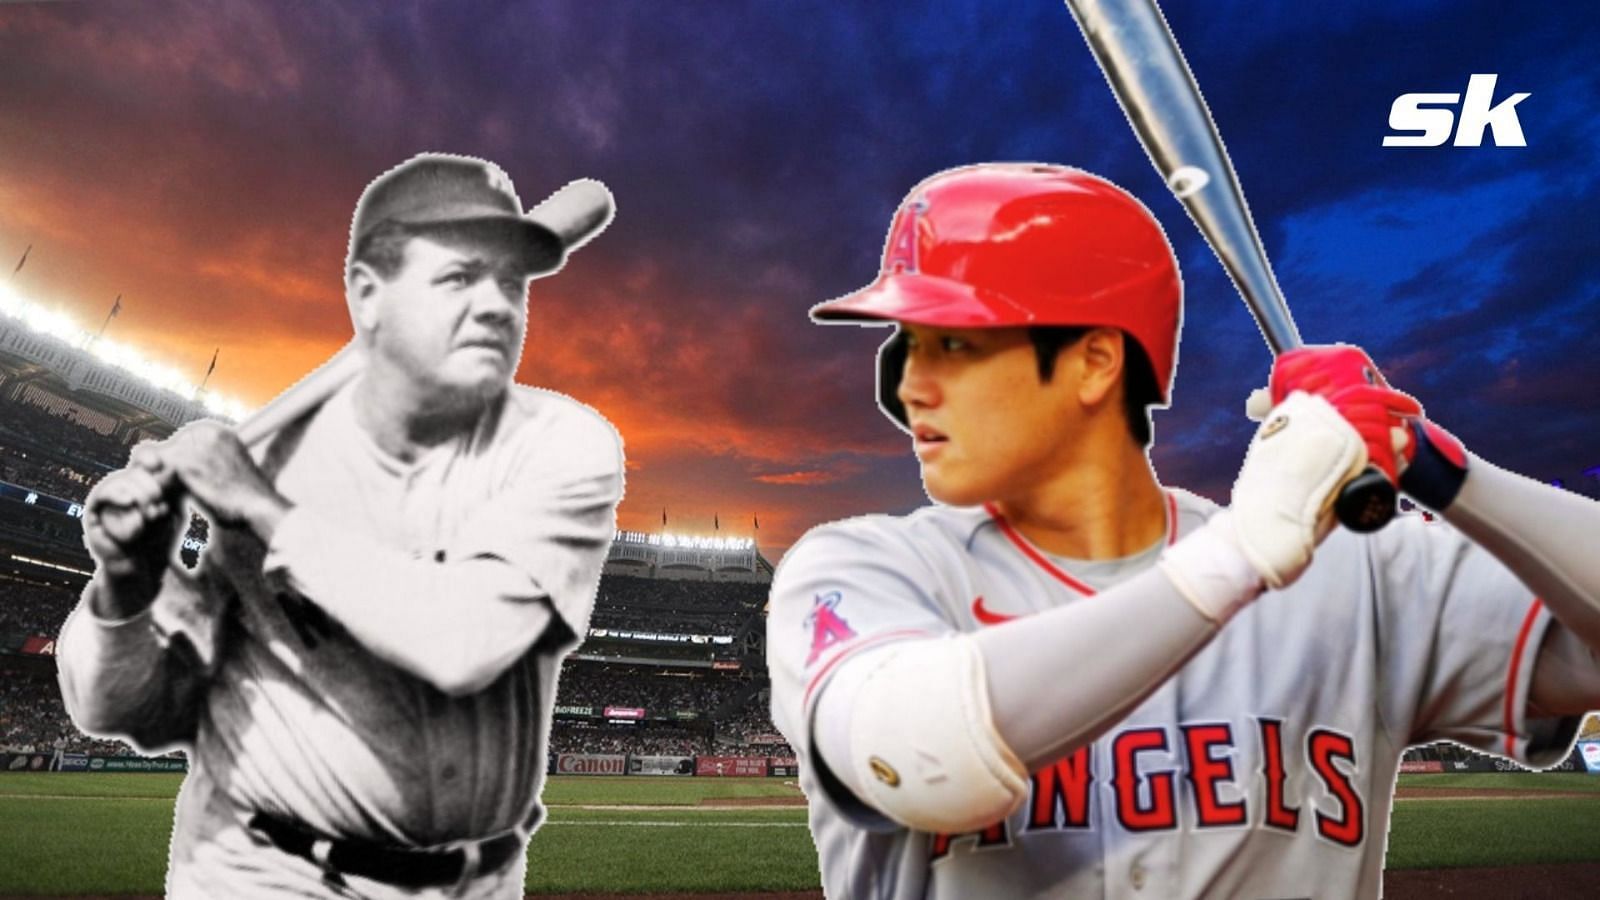 Shohei Ohtani of the Los Angeles Angels and Babe Ruth of the New York Yankees